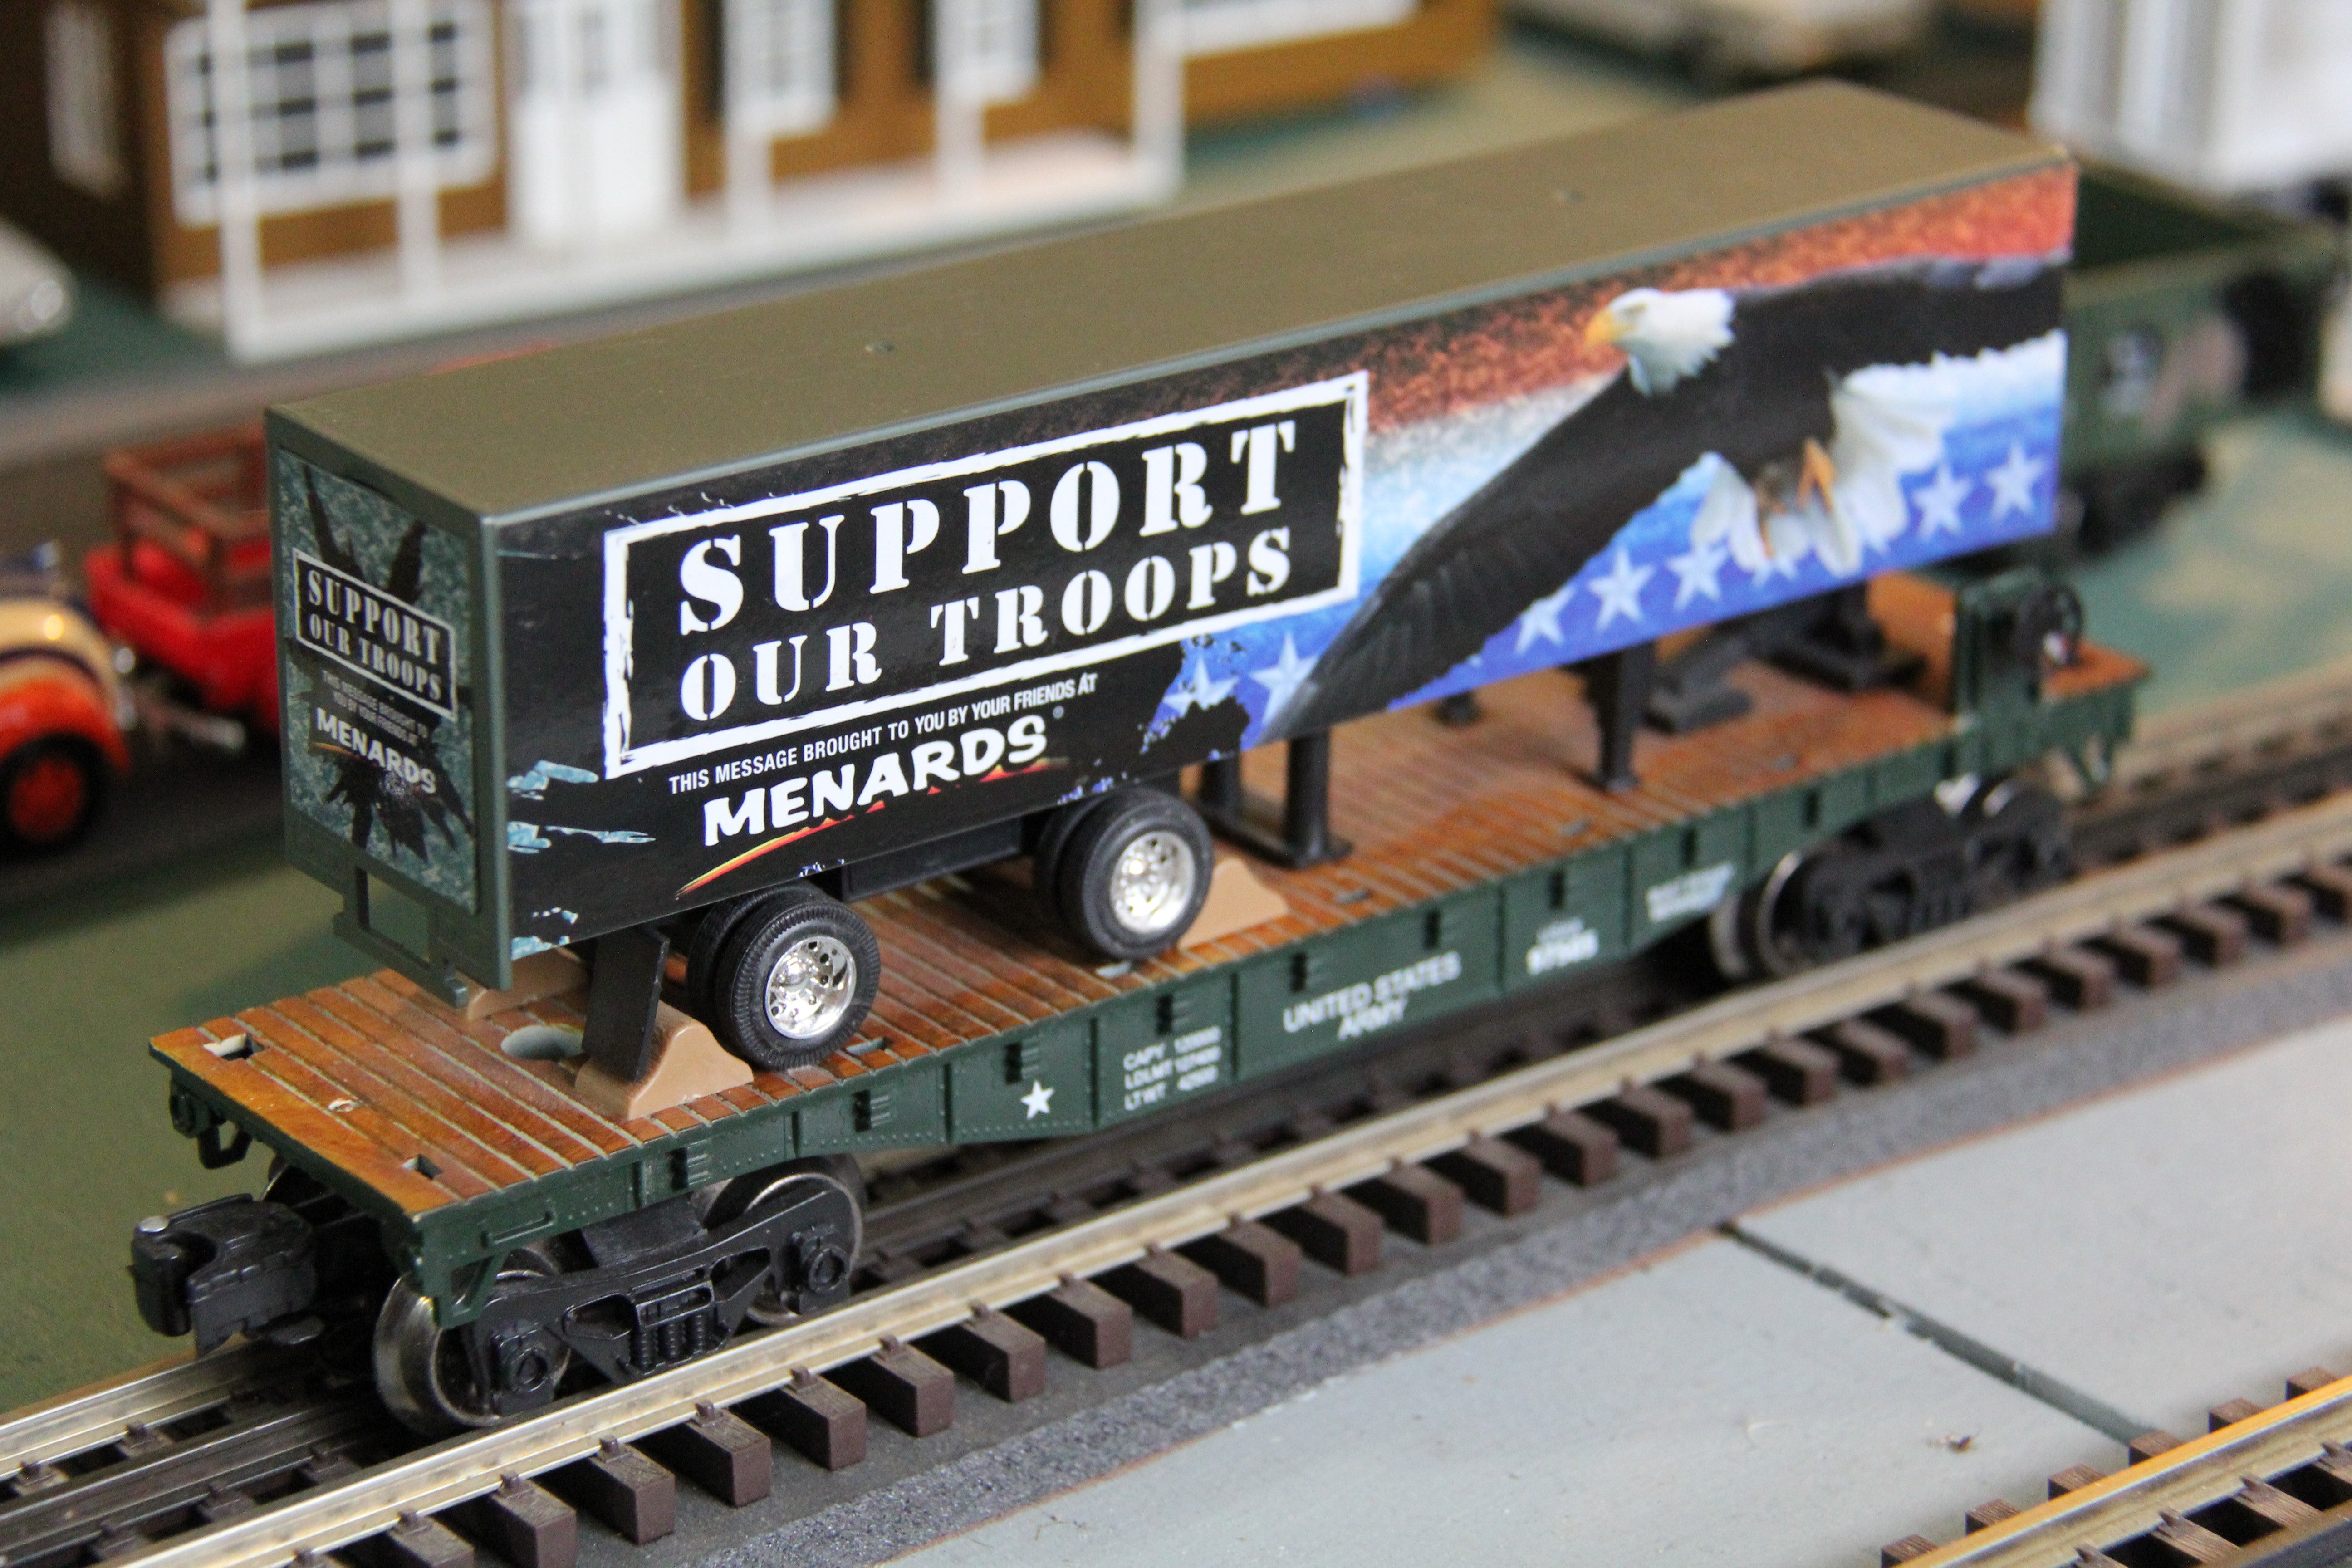 Menards #279-3093 Military Flatcar w/ Support Our Troops Trailer-Second hand-M4260